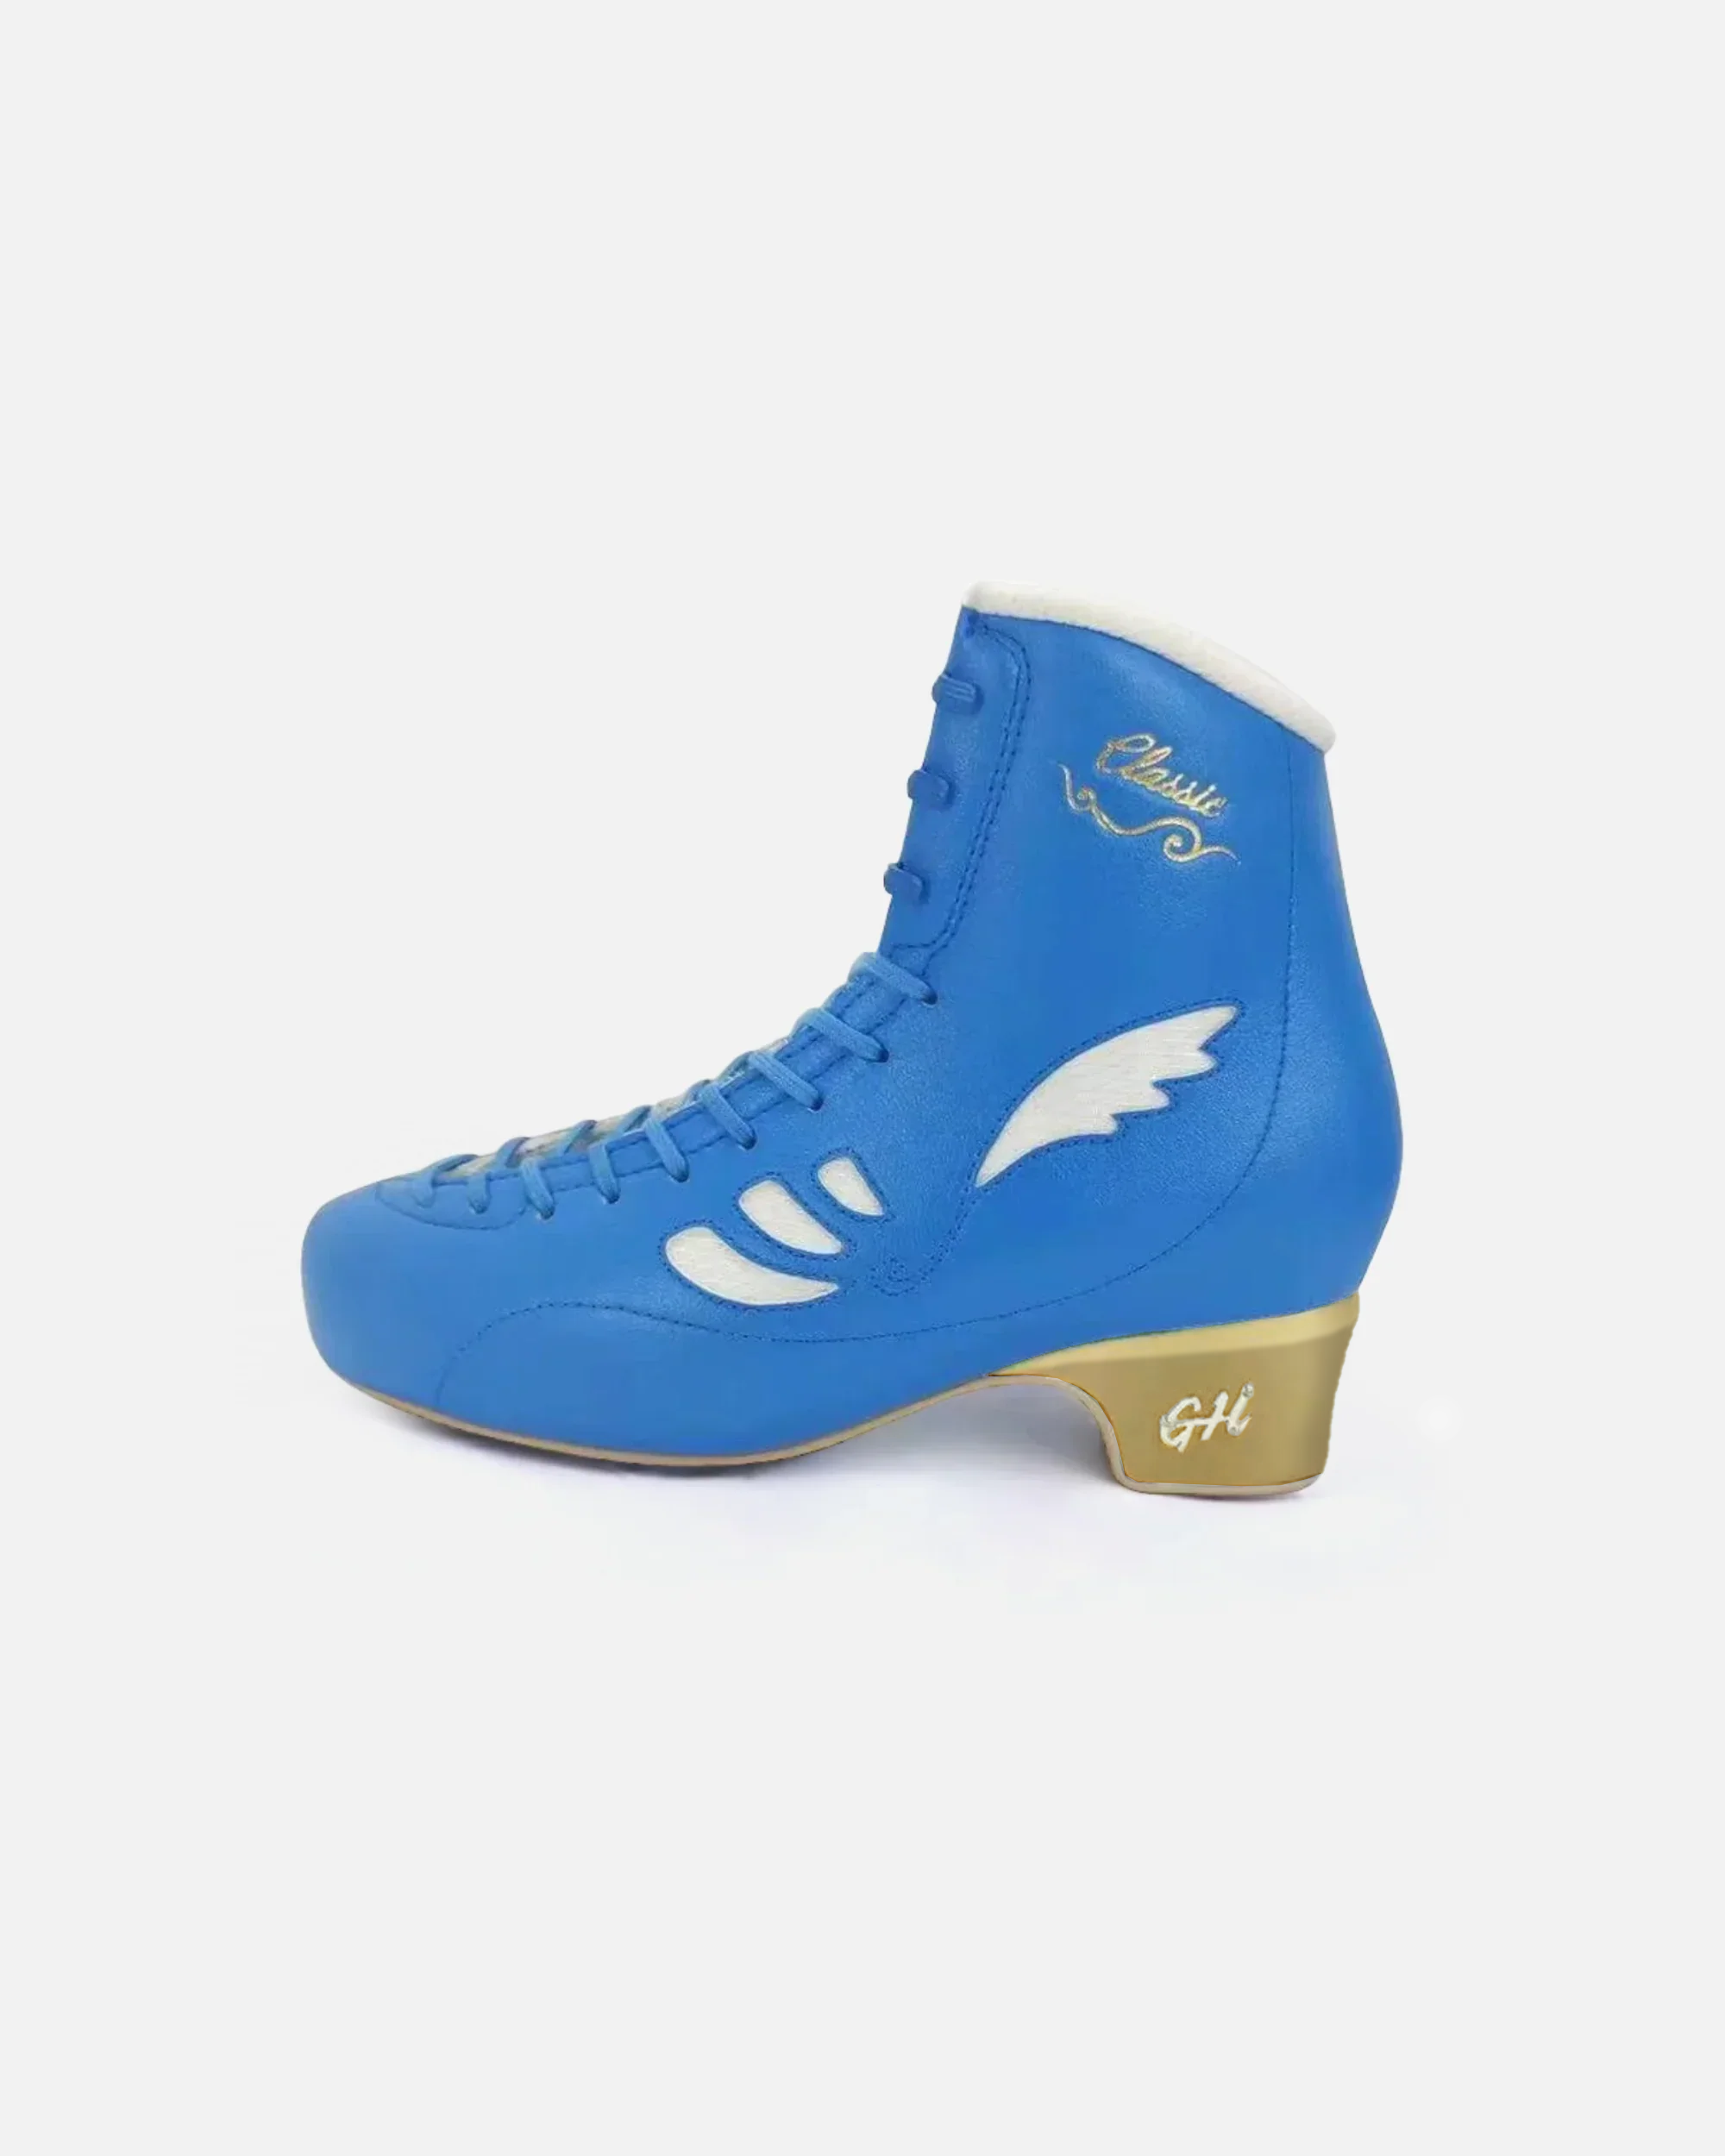 Classic Ice Figure Skates (Boots Only)